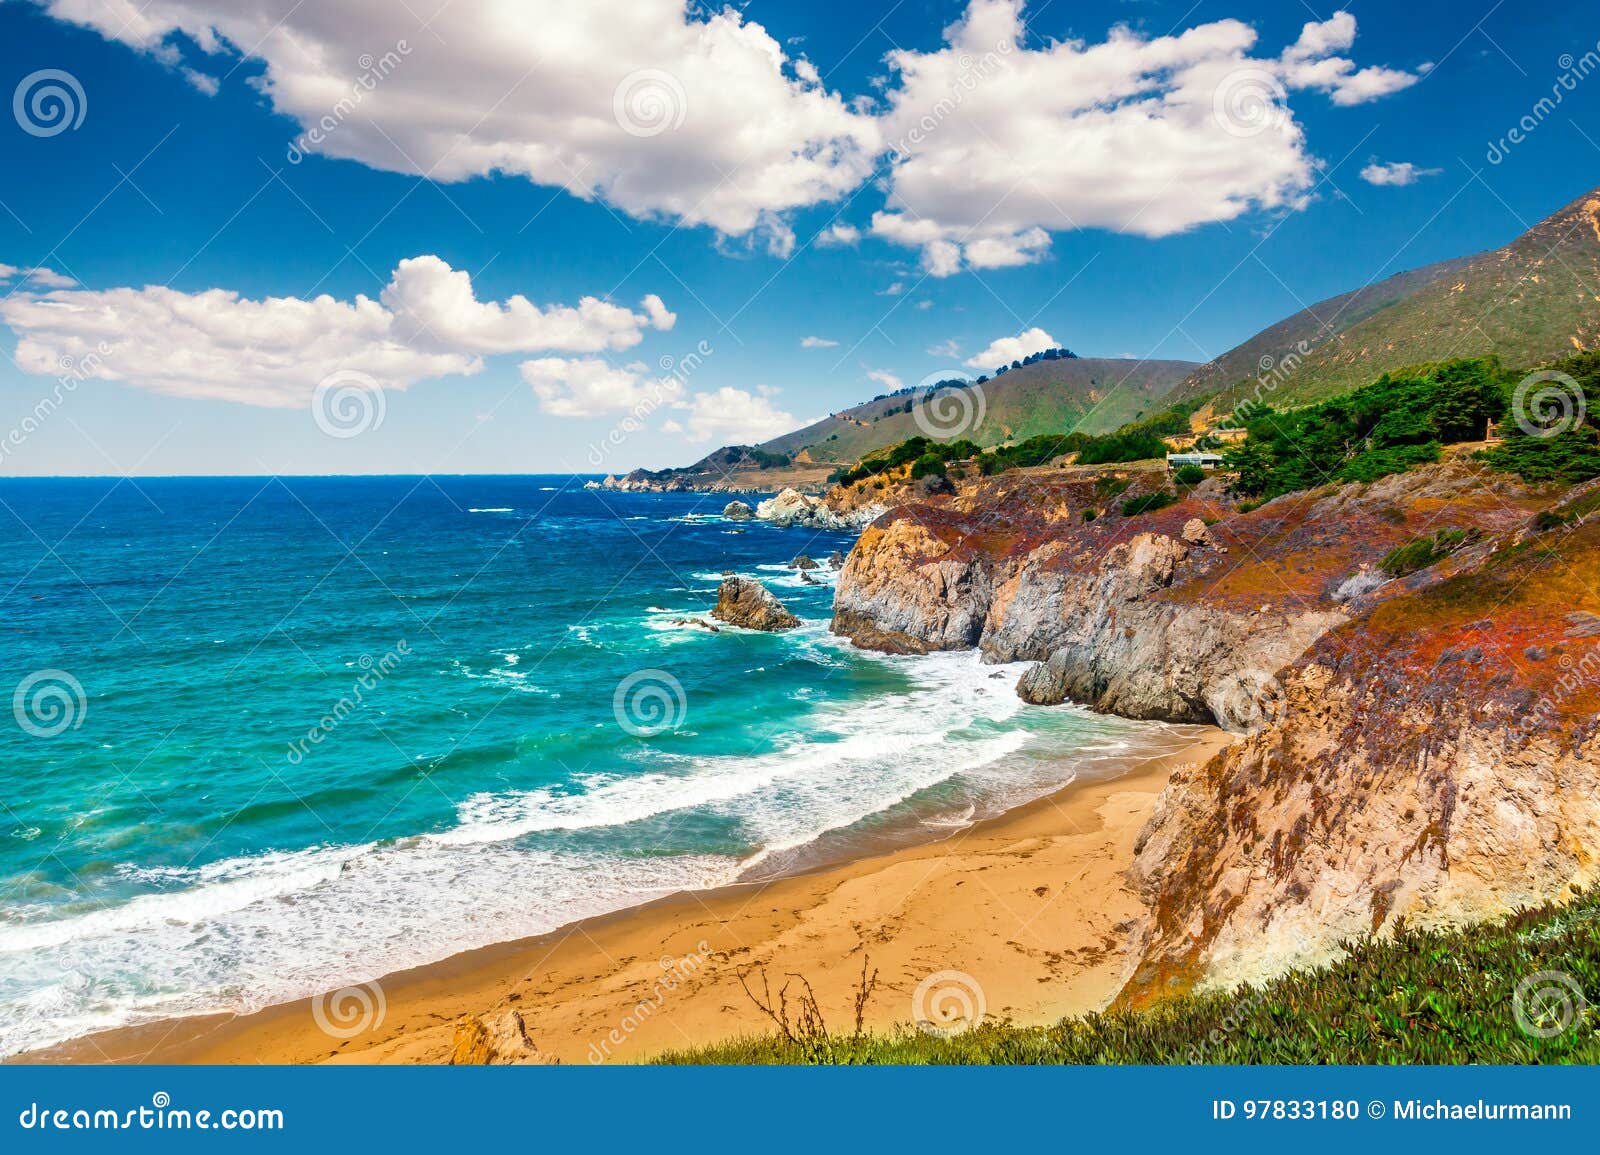 beautiful coastline scenery on pacific coast highway 1 at the us west coast traveling south to los angeles, california